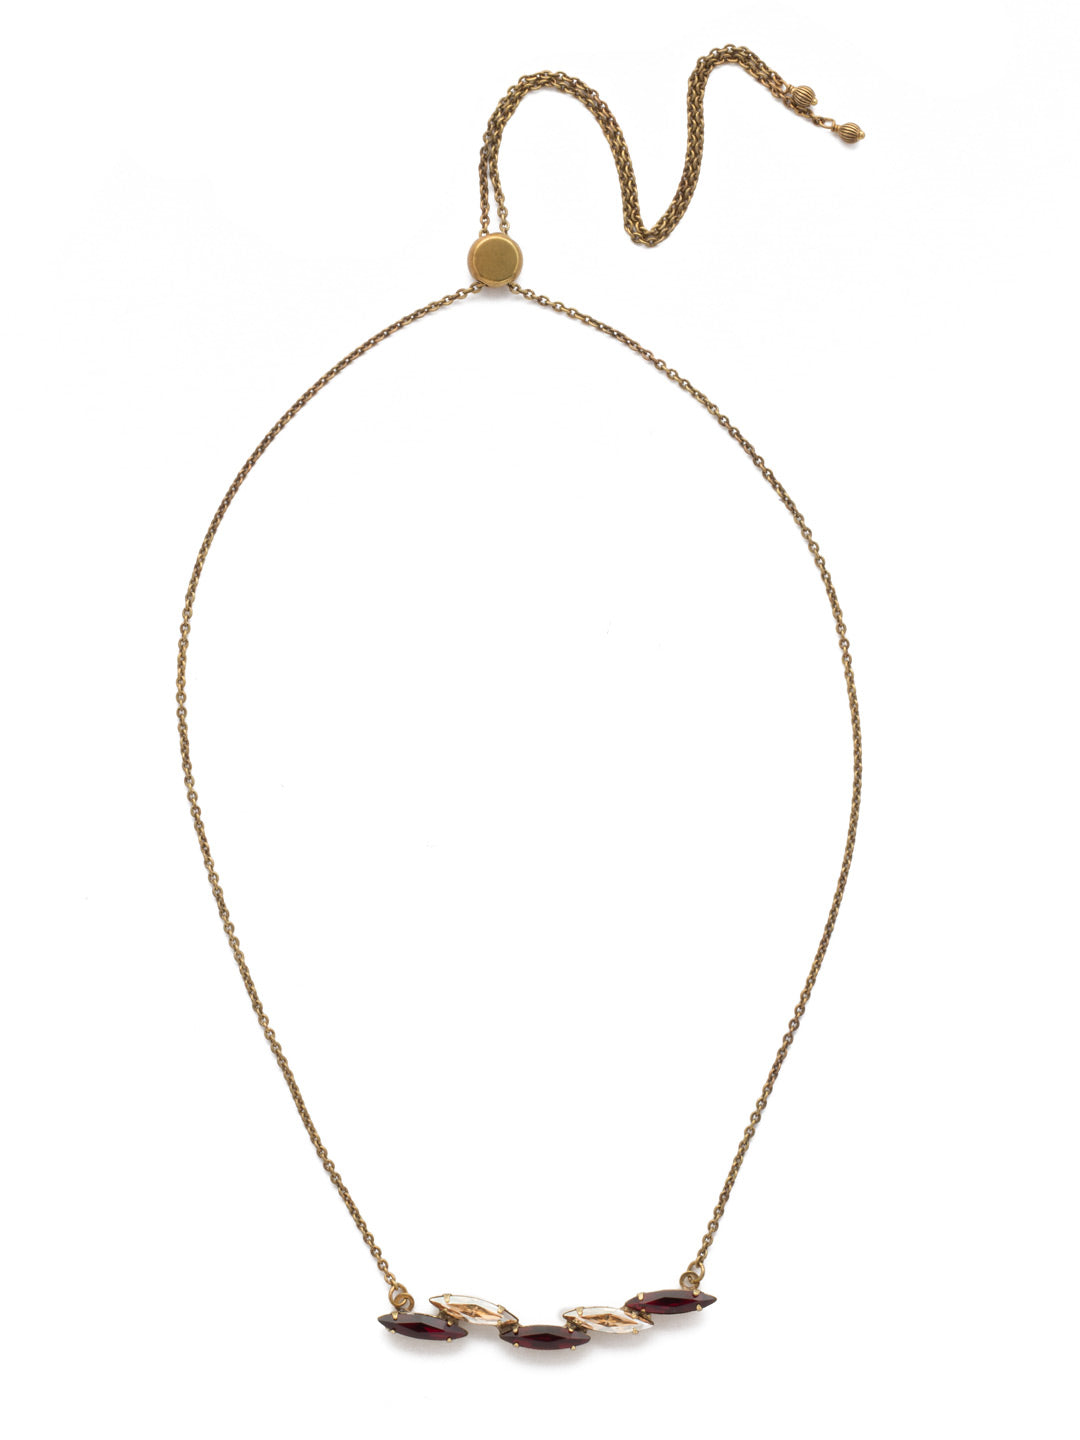 Cersei Tennis Necklace - NEF44AGMMA - A delicate chain is held together by a line of dancing gems that adjusts to suit your neckline. This is a great layering piece that can compliment a variety of necklaces from statement to pendant.